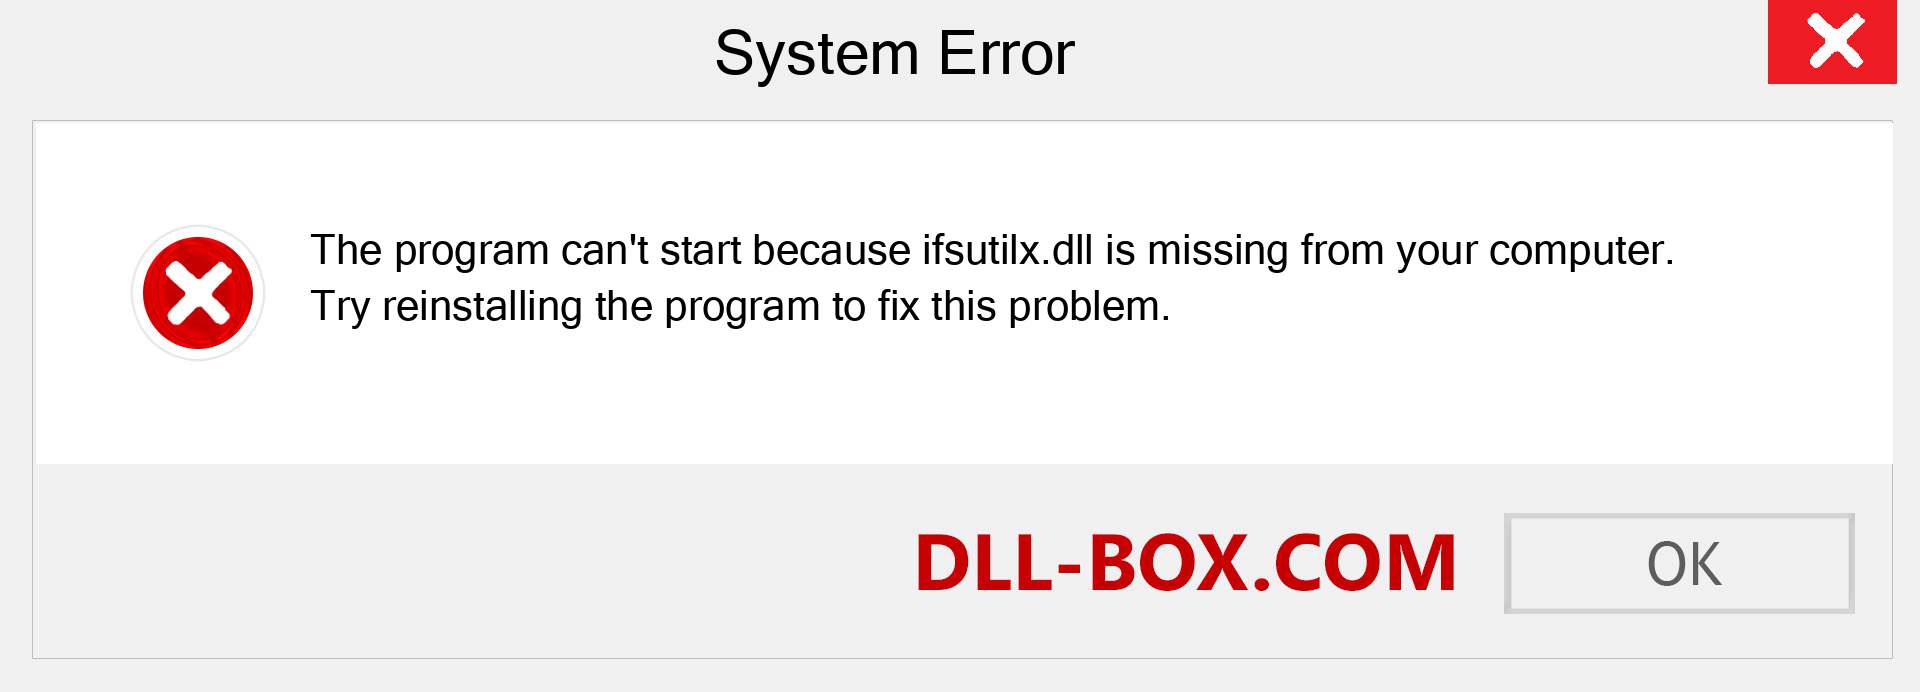  ifsutilx.dll file is missing?. Download for Windows 7, 8, 10 - Fix  ifsutilx dll Missing Error on Windows, photos, images